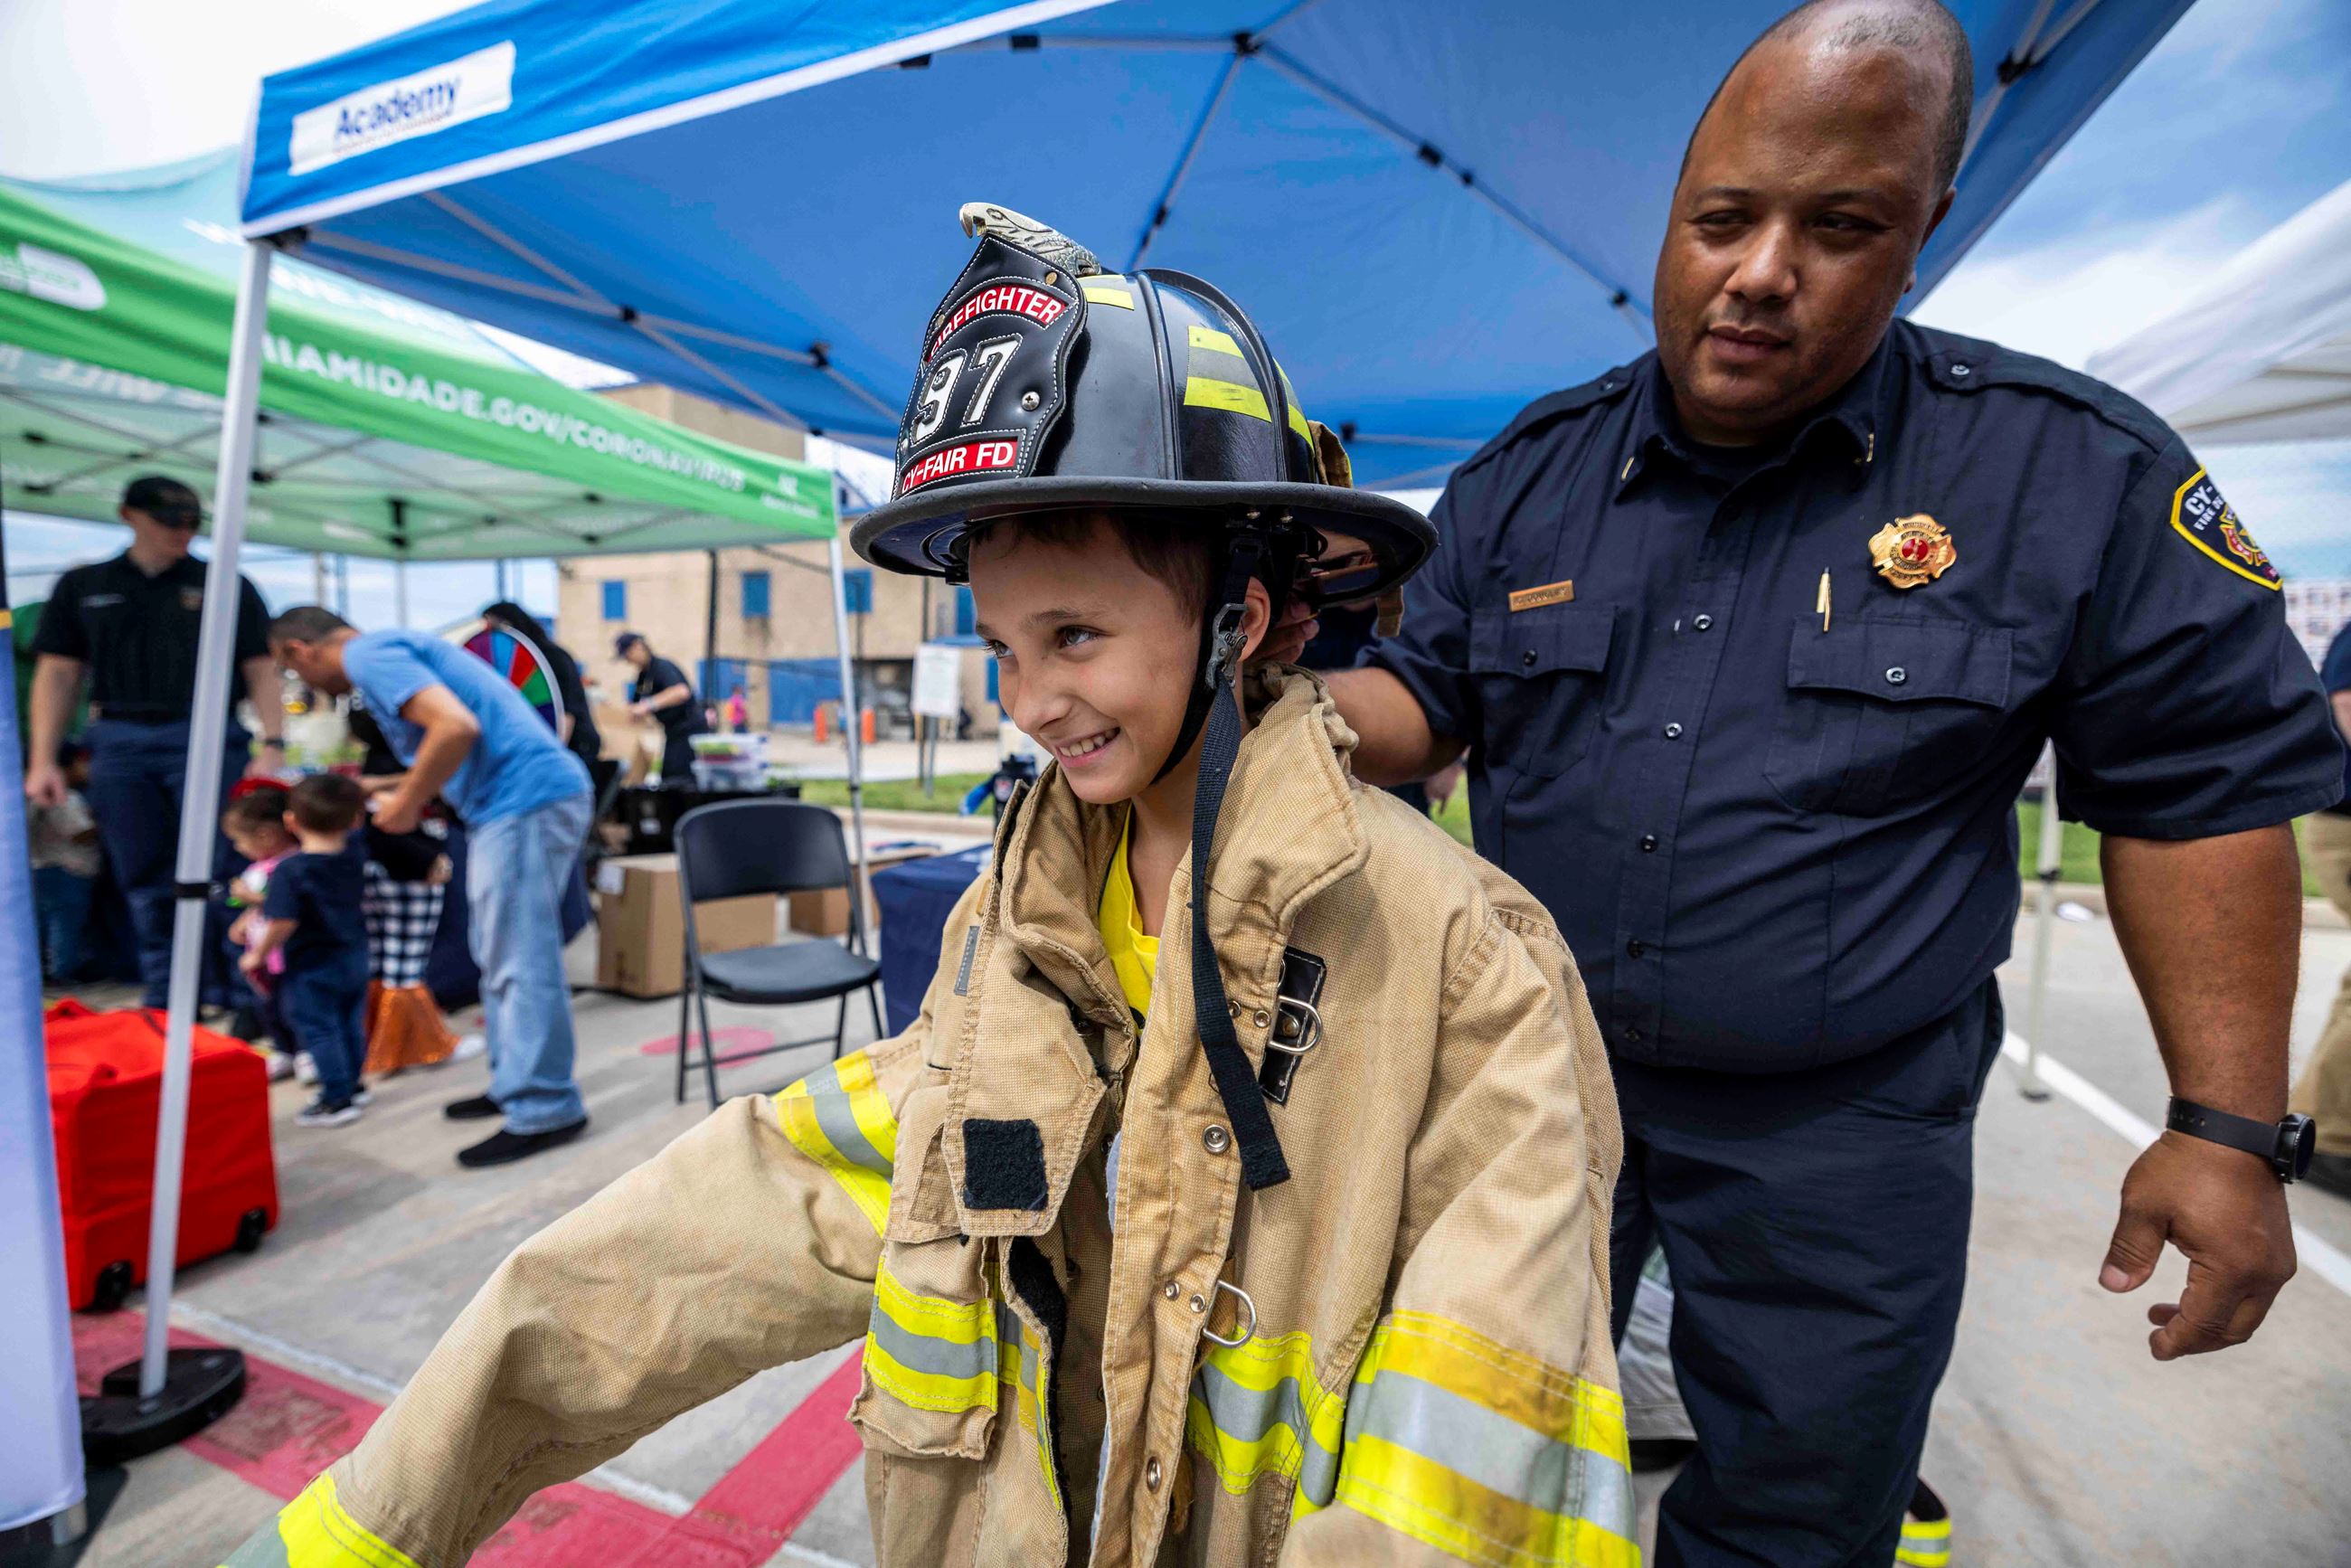 Spark Your Child’s Interest in Safety: Registration Now Open for Cy-Fair Fire Department's Kids Fire & Safety Camp This Summer